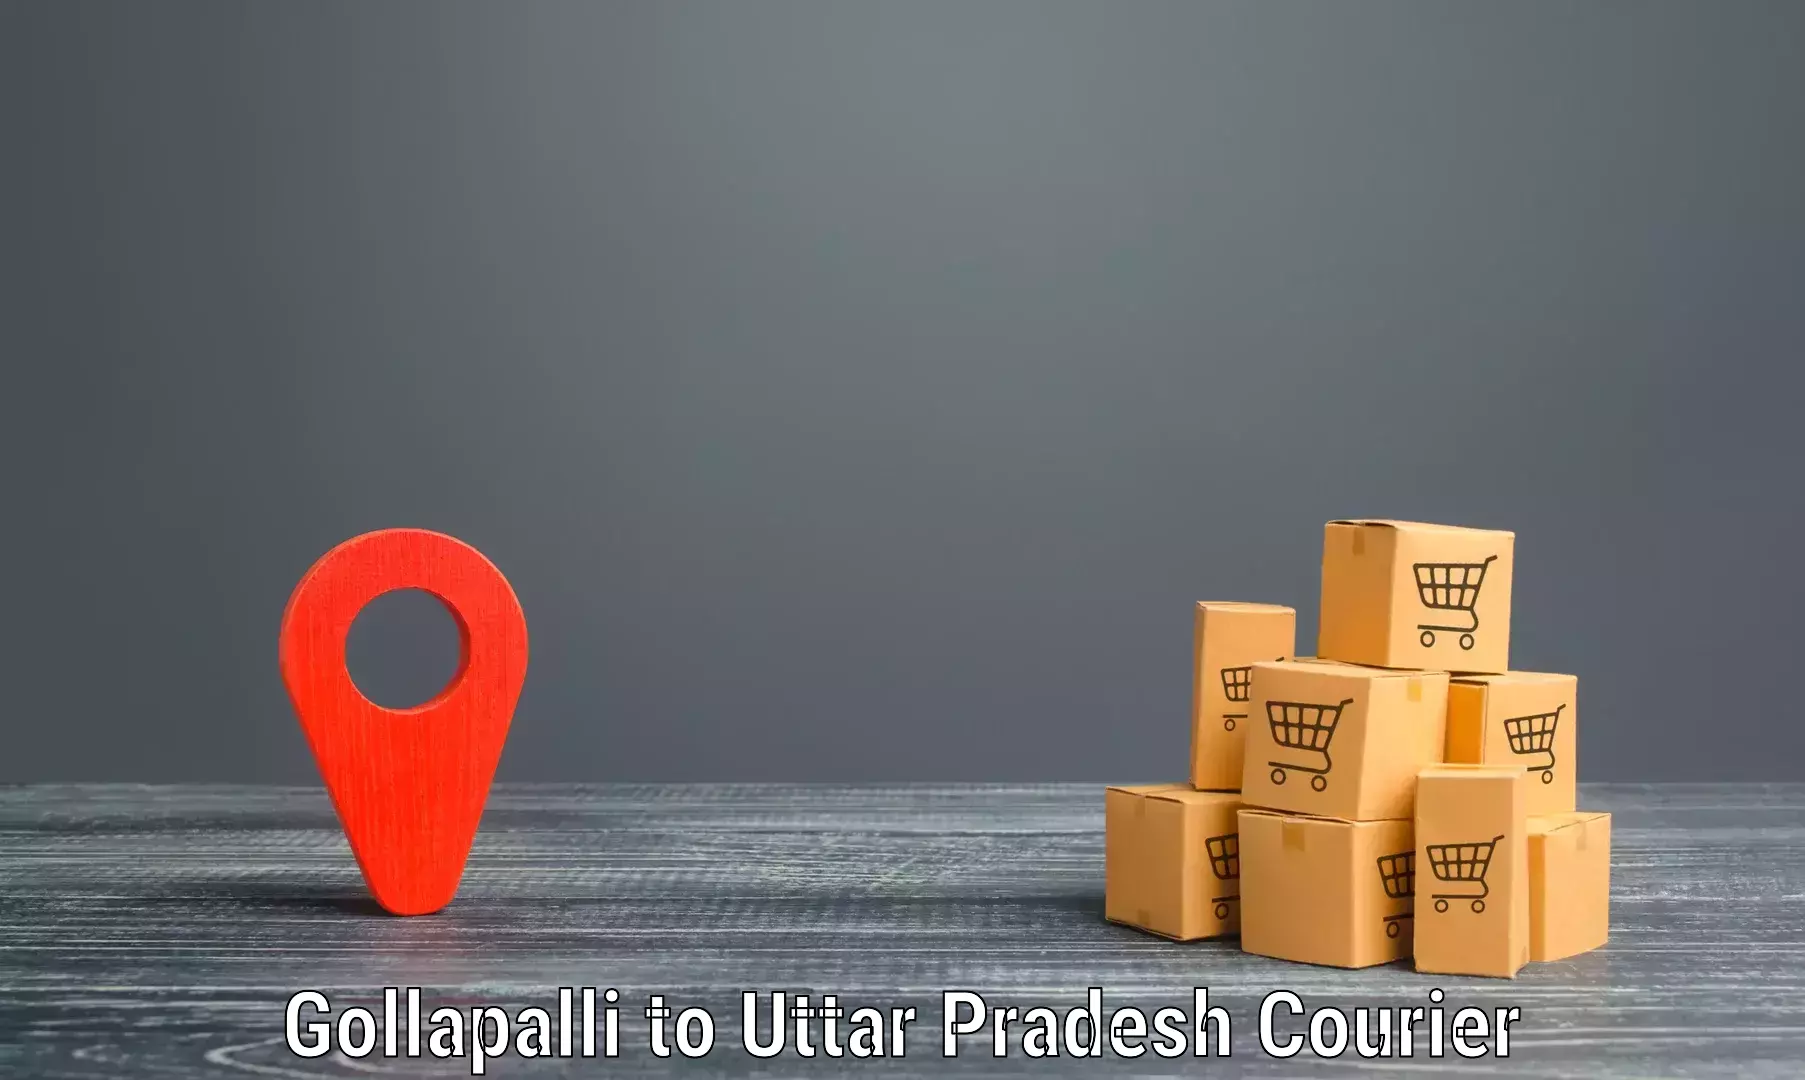 Courier service efficiency in Gollapalli to Menhdawal